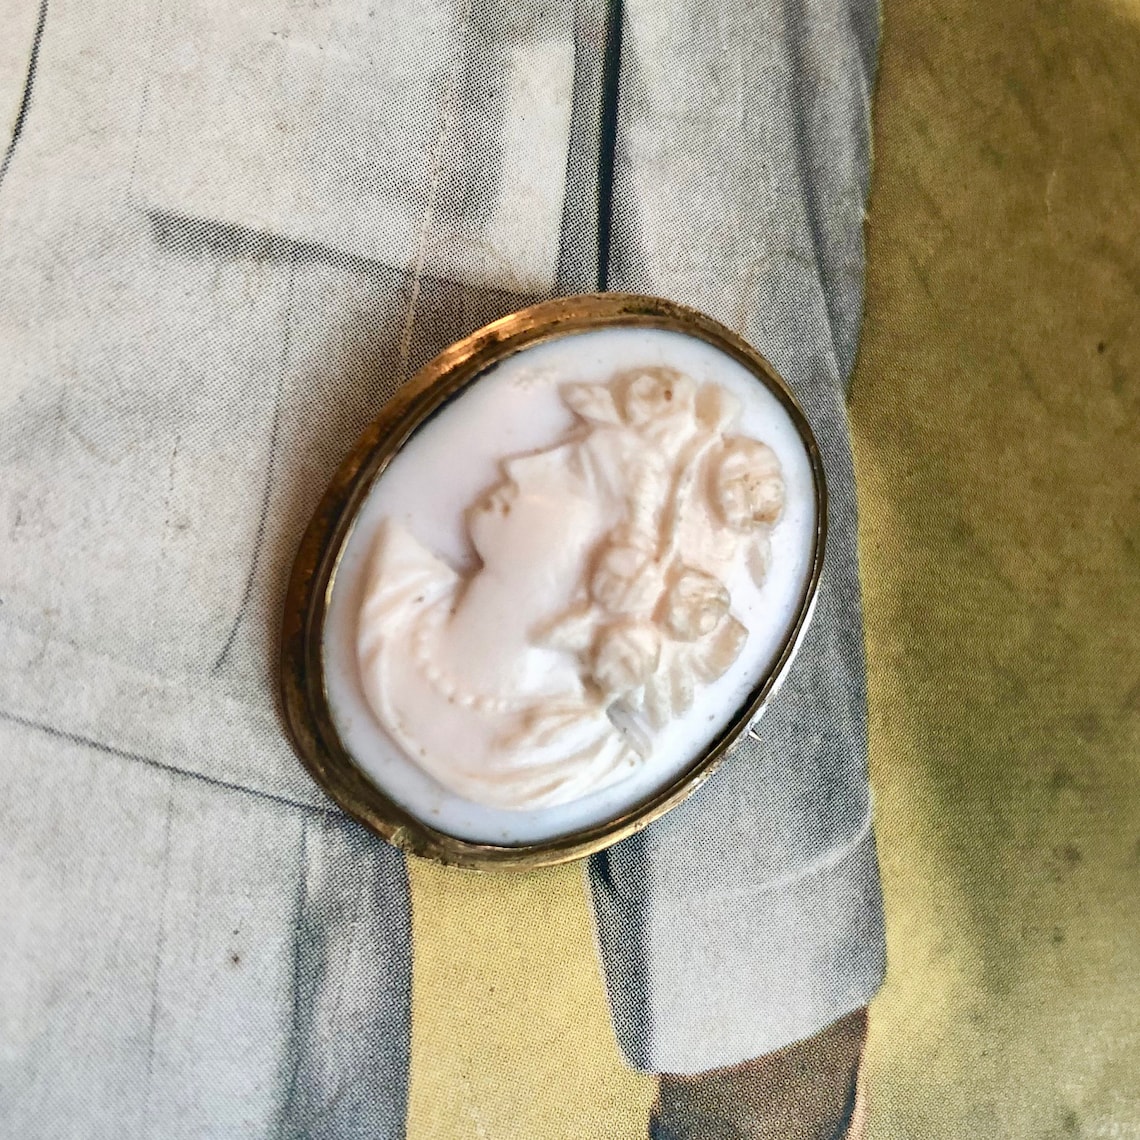 Antique Left Facing Grecian Cameo Brooch // 1920s White Shell | Etsy